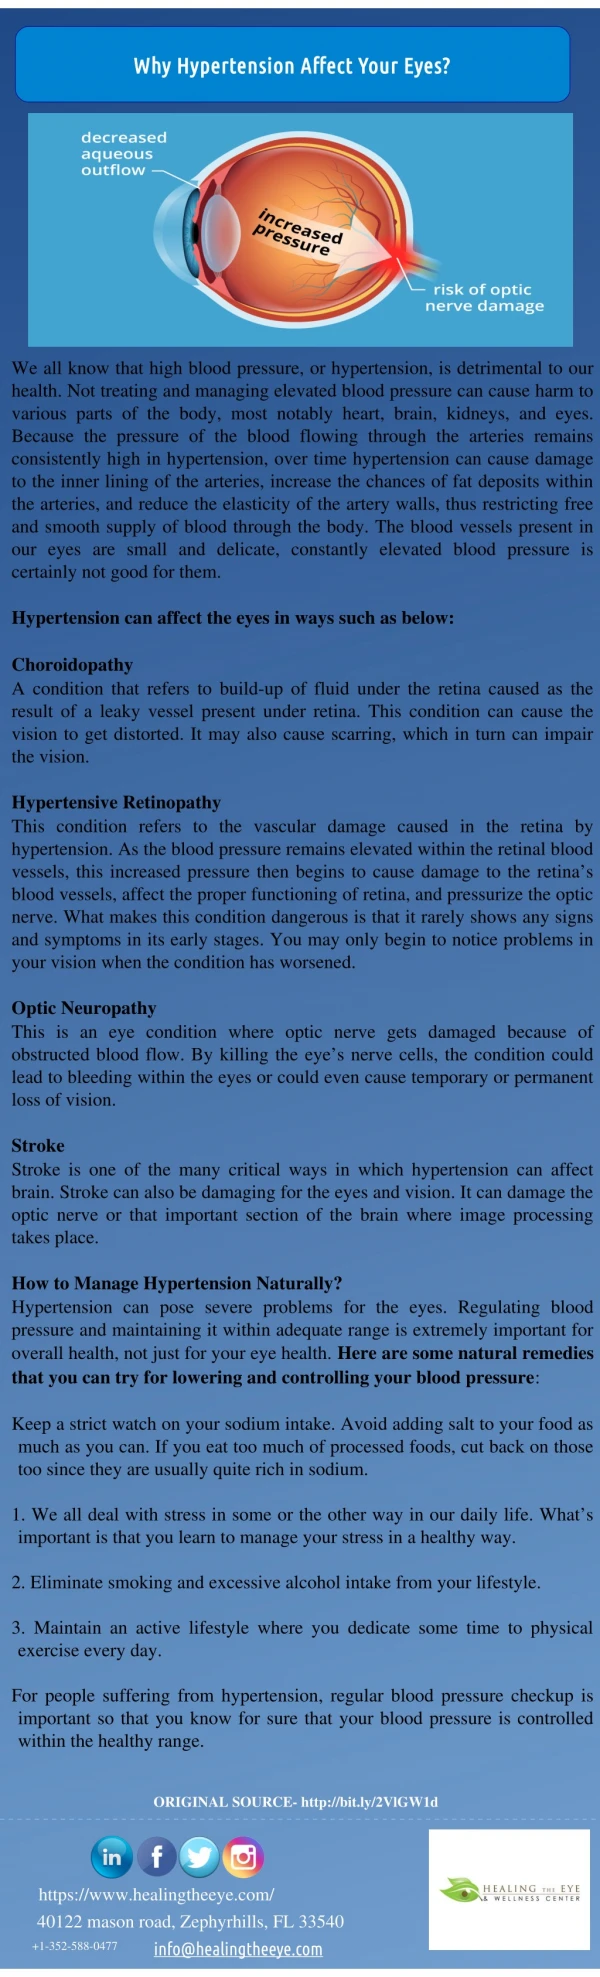 Hypertension Affects Your Eyes